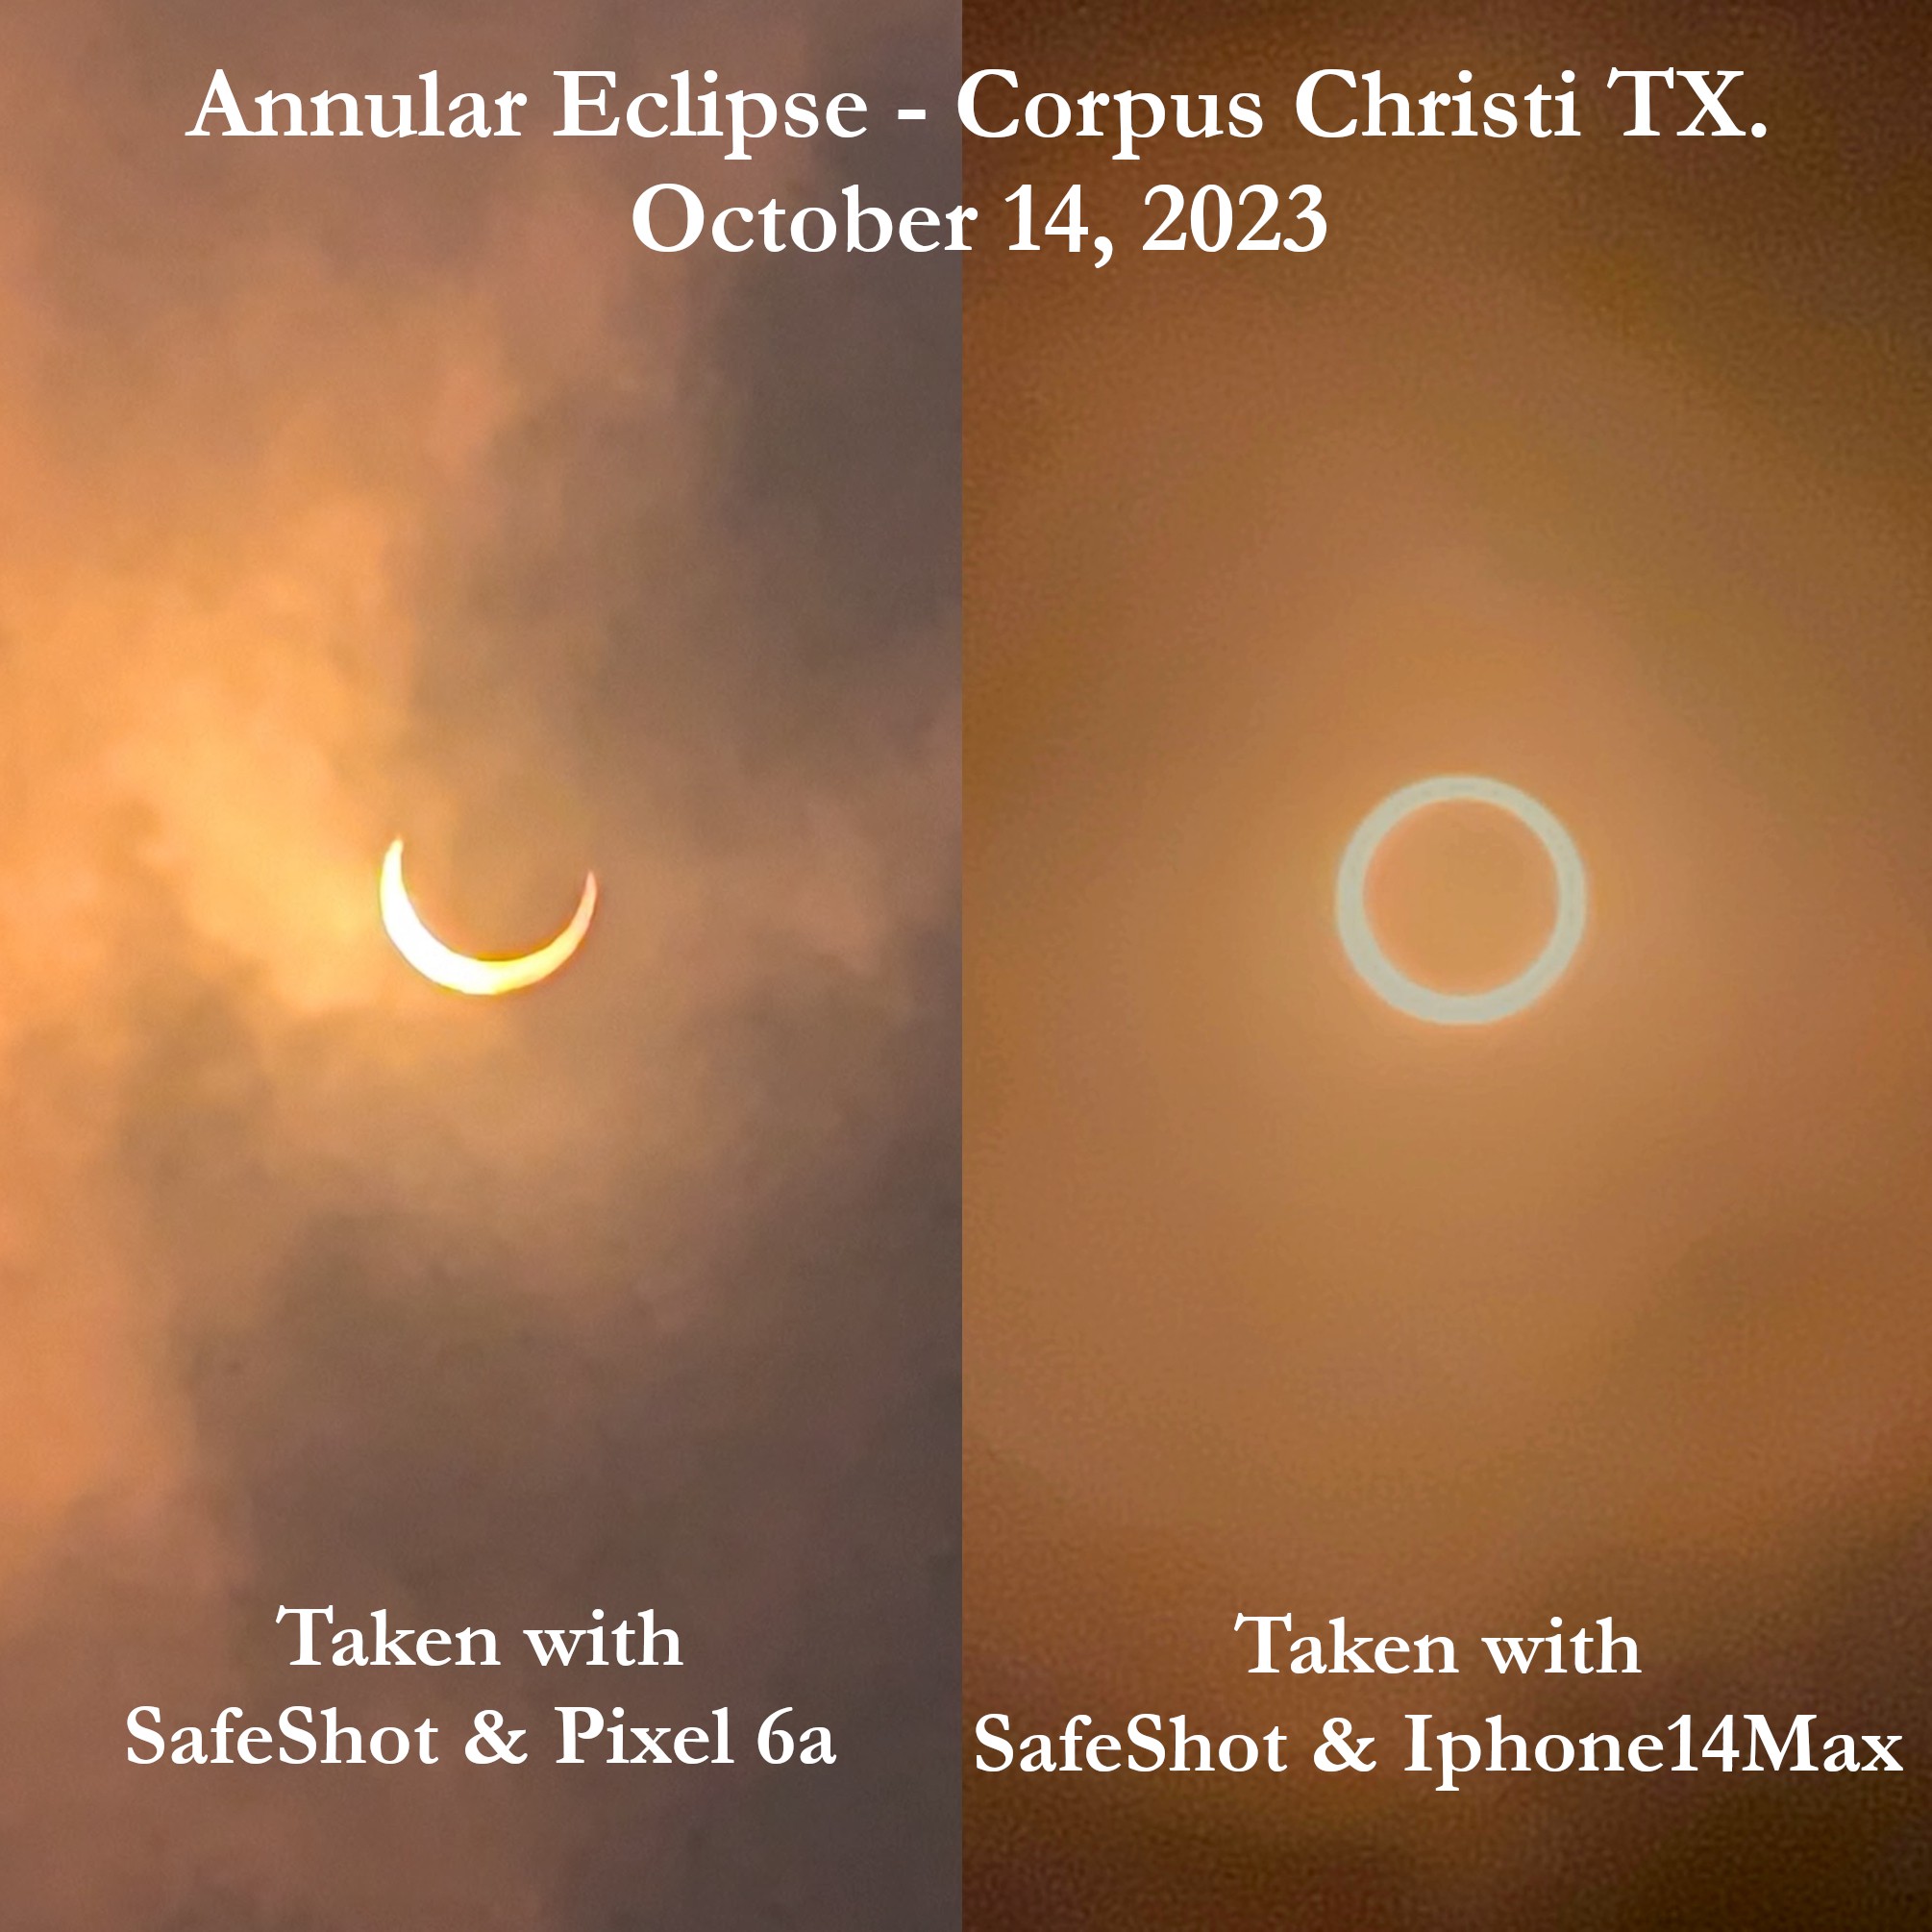 Prior and full annular eclipse images taken with SafeShot.